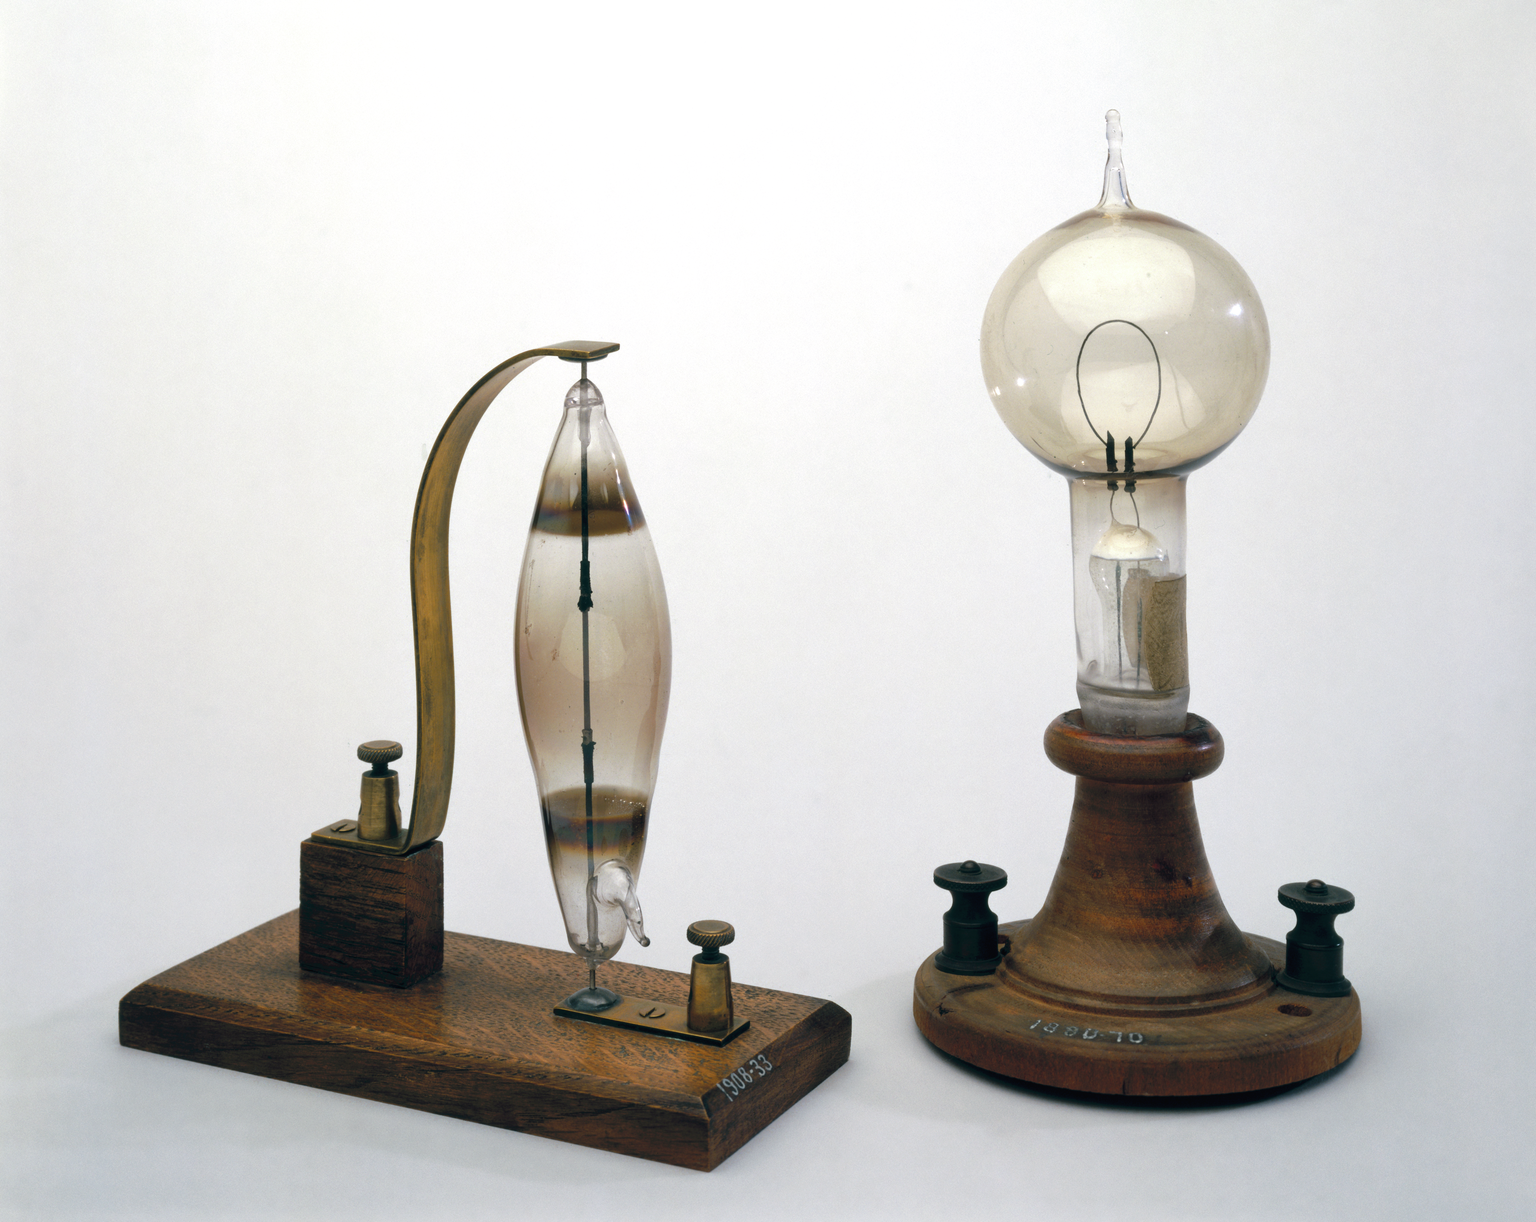 Early carbon and rod filament incandescent electric lamp made by Joseph Swan (left) and original incandescent electric carbon filament lamp by Thomas Edison. 